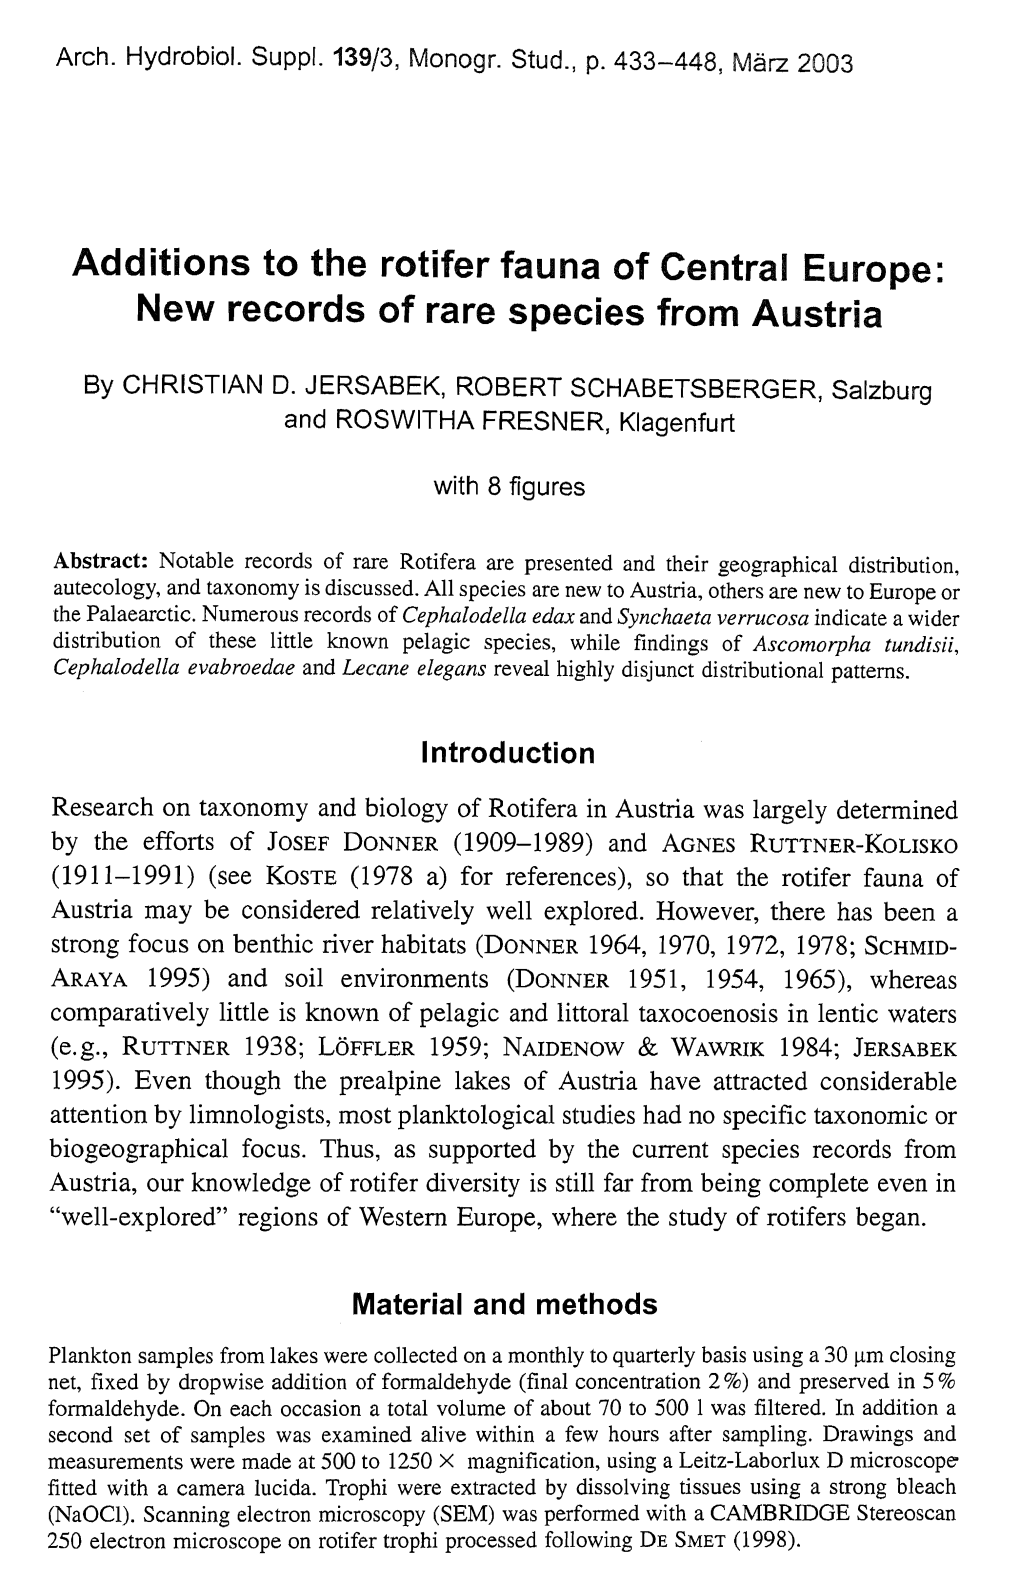 Additions to the Rotifer Fauna of Central Europe: New Records of Rare Species from Austria